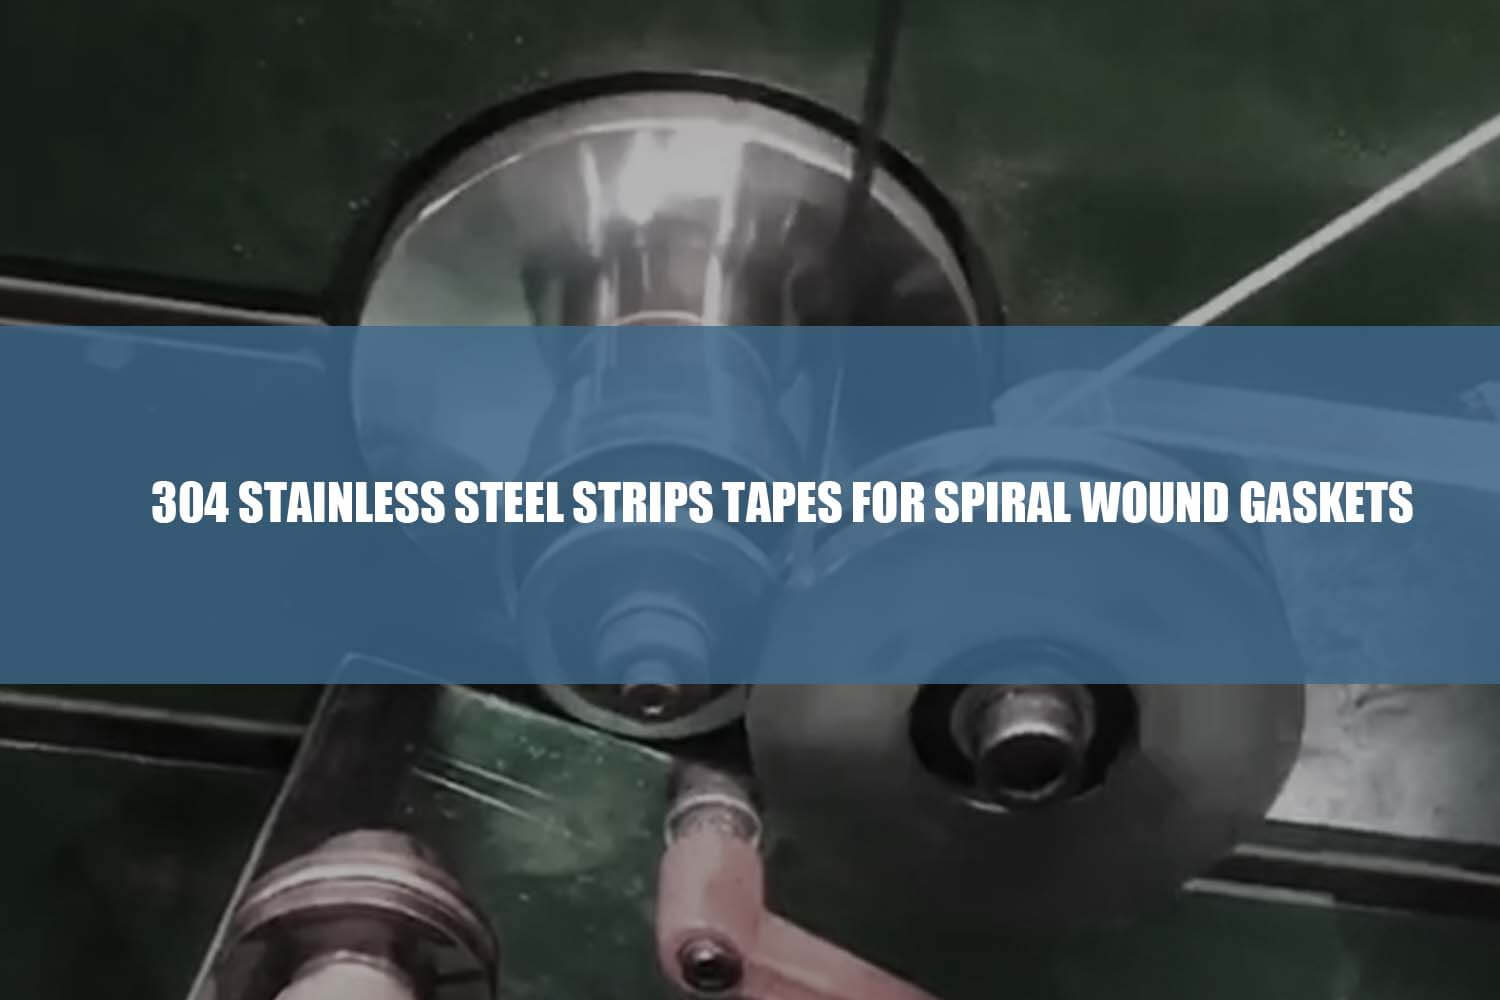 304 stainless steel strips tapes for spiral wound gaskets